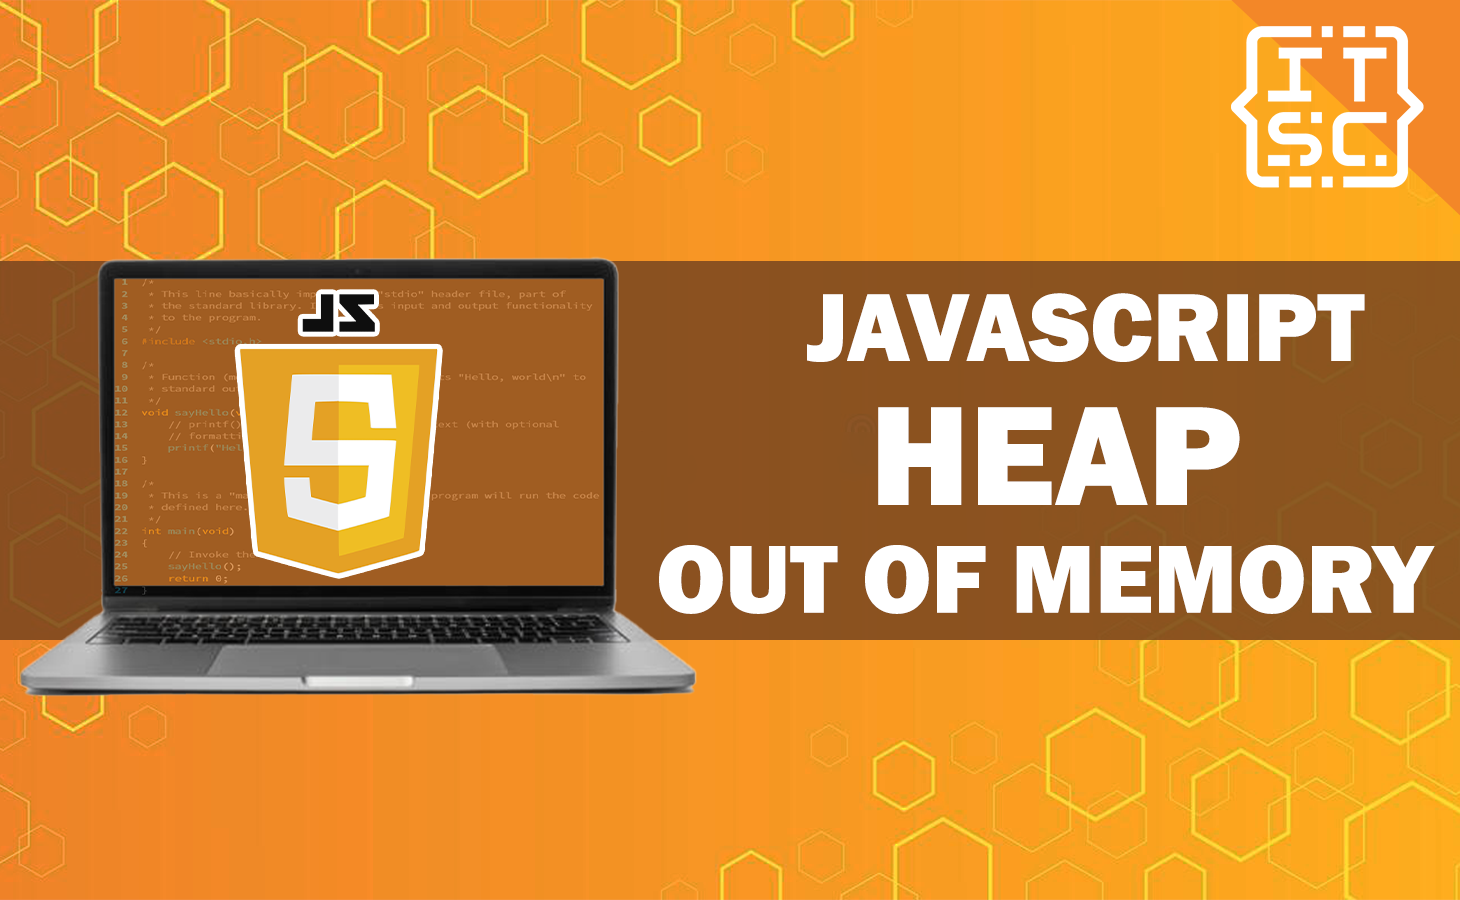 Javascript heap out of memory